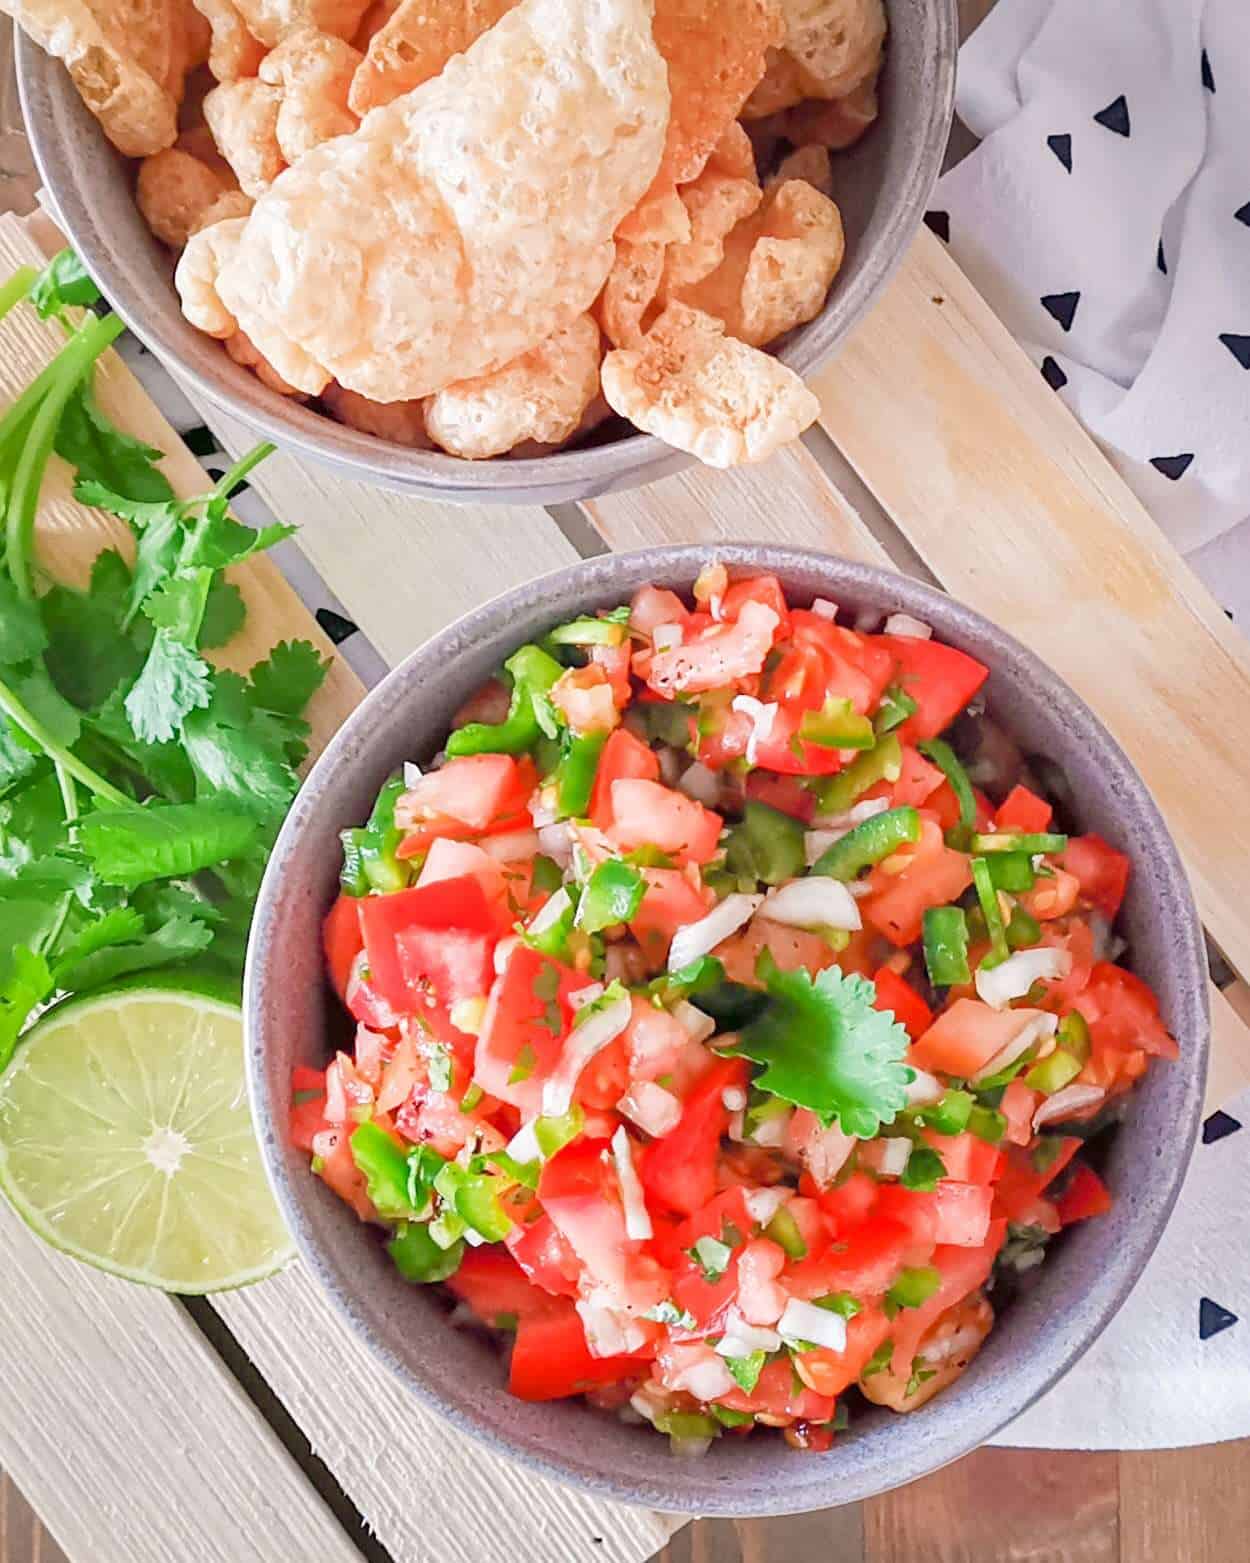 Keto Pico De gallo in a bowl with pork rinds for dipping